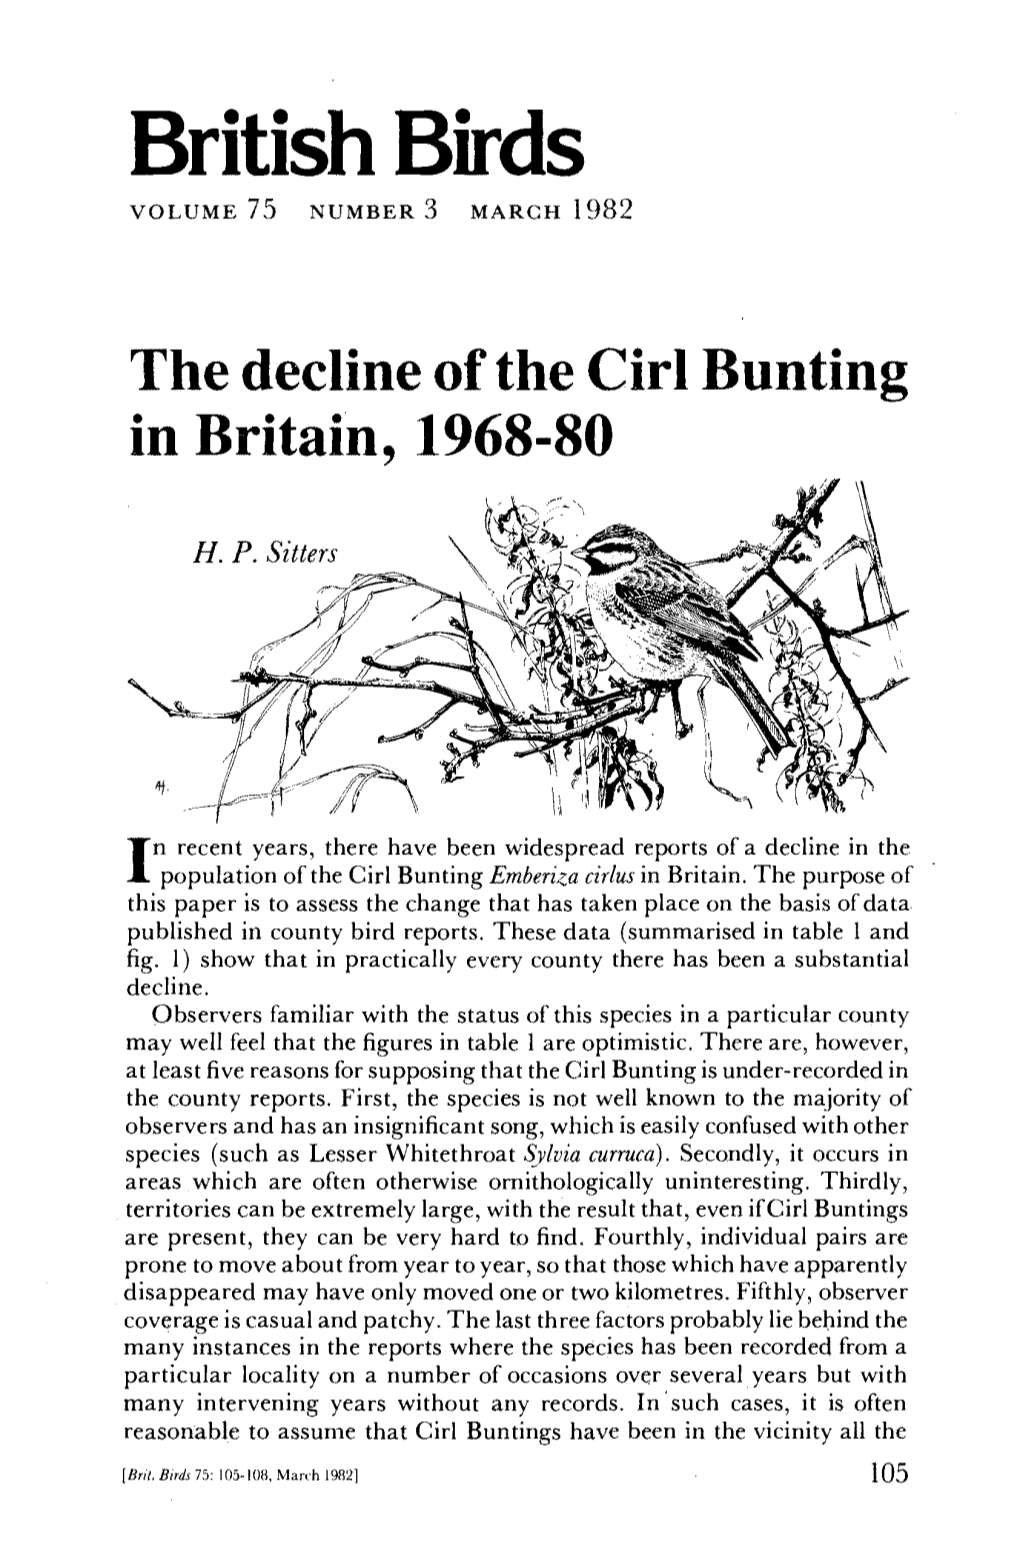 The Decline of the Cirl Bunting in Britain, 1968-80